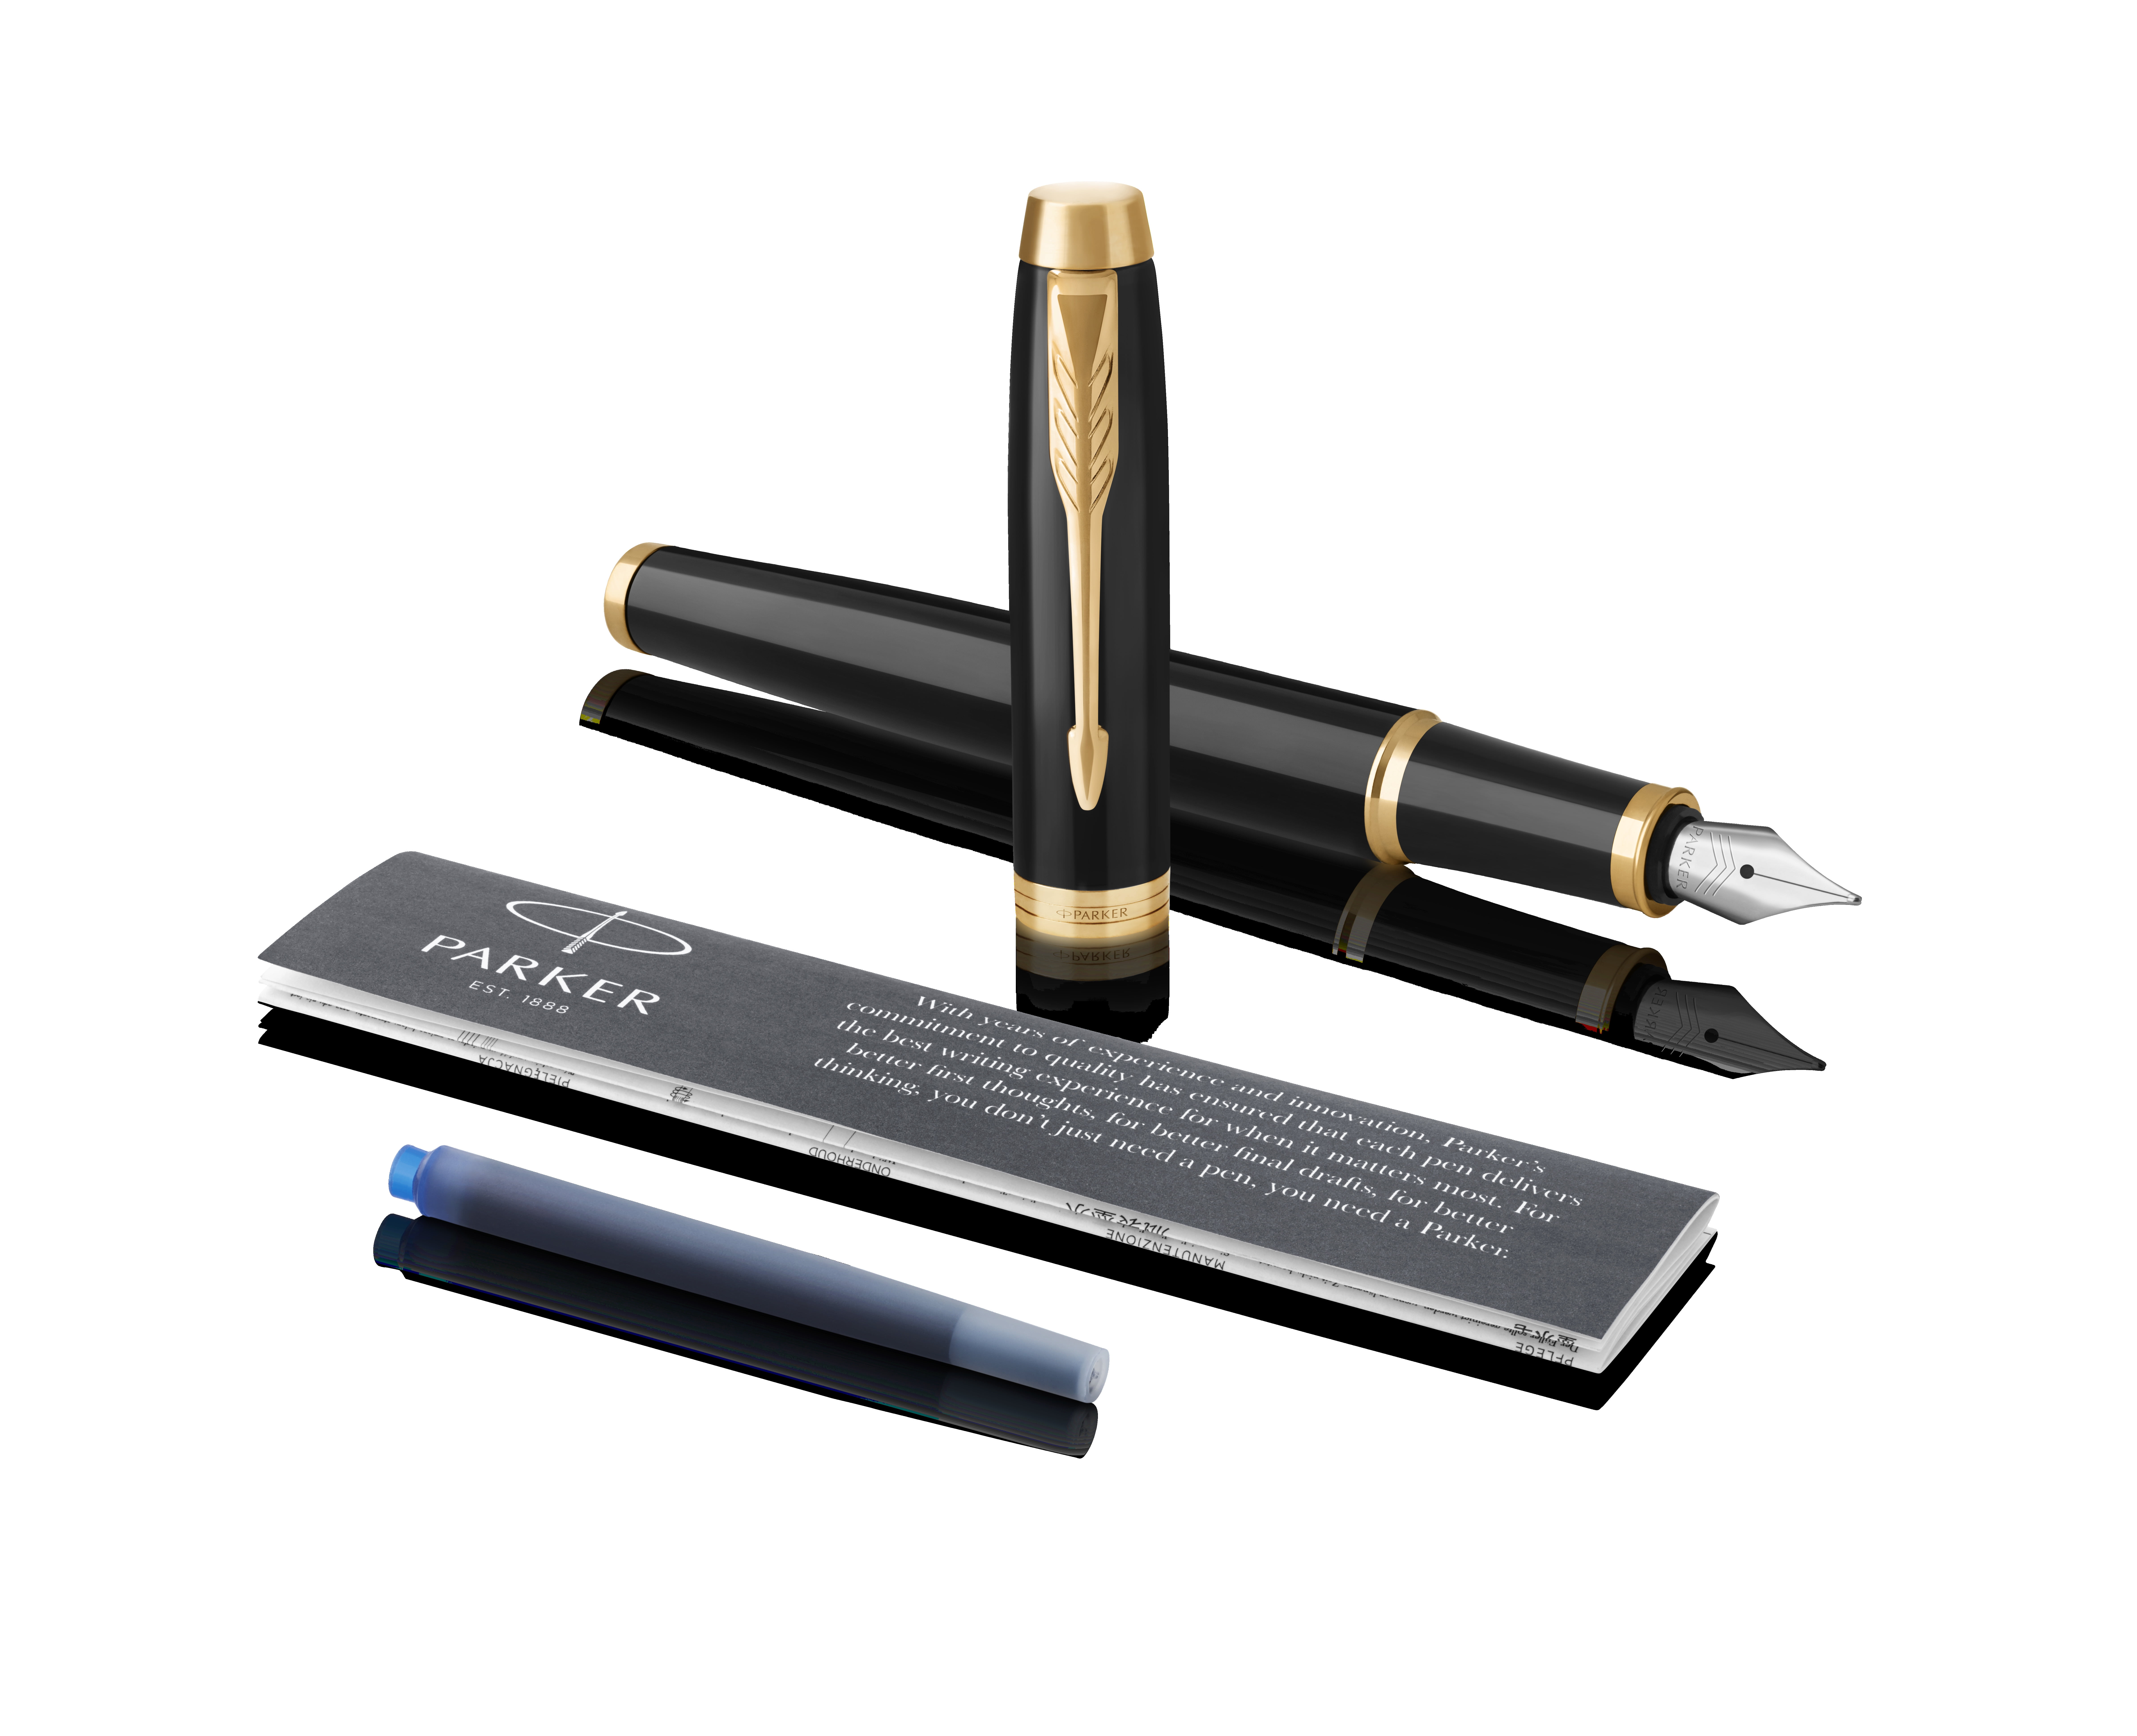 Parker IM Fountain Pen, Black Lacquer with Gold Trim, Fine Nib with Blue  Ink Refill, Gift Box, Calligraphy Pen, Pen for journaling, Great Holiday  Gift